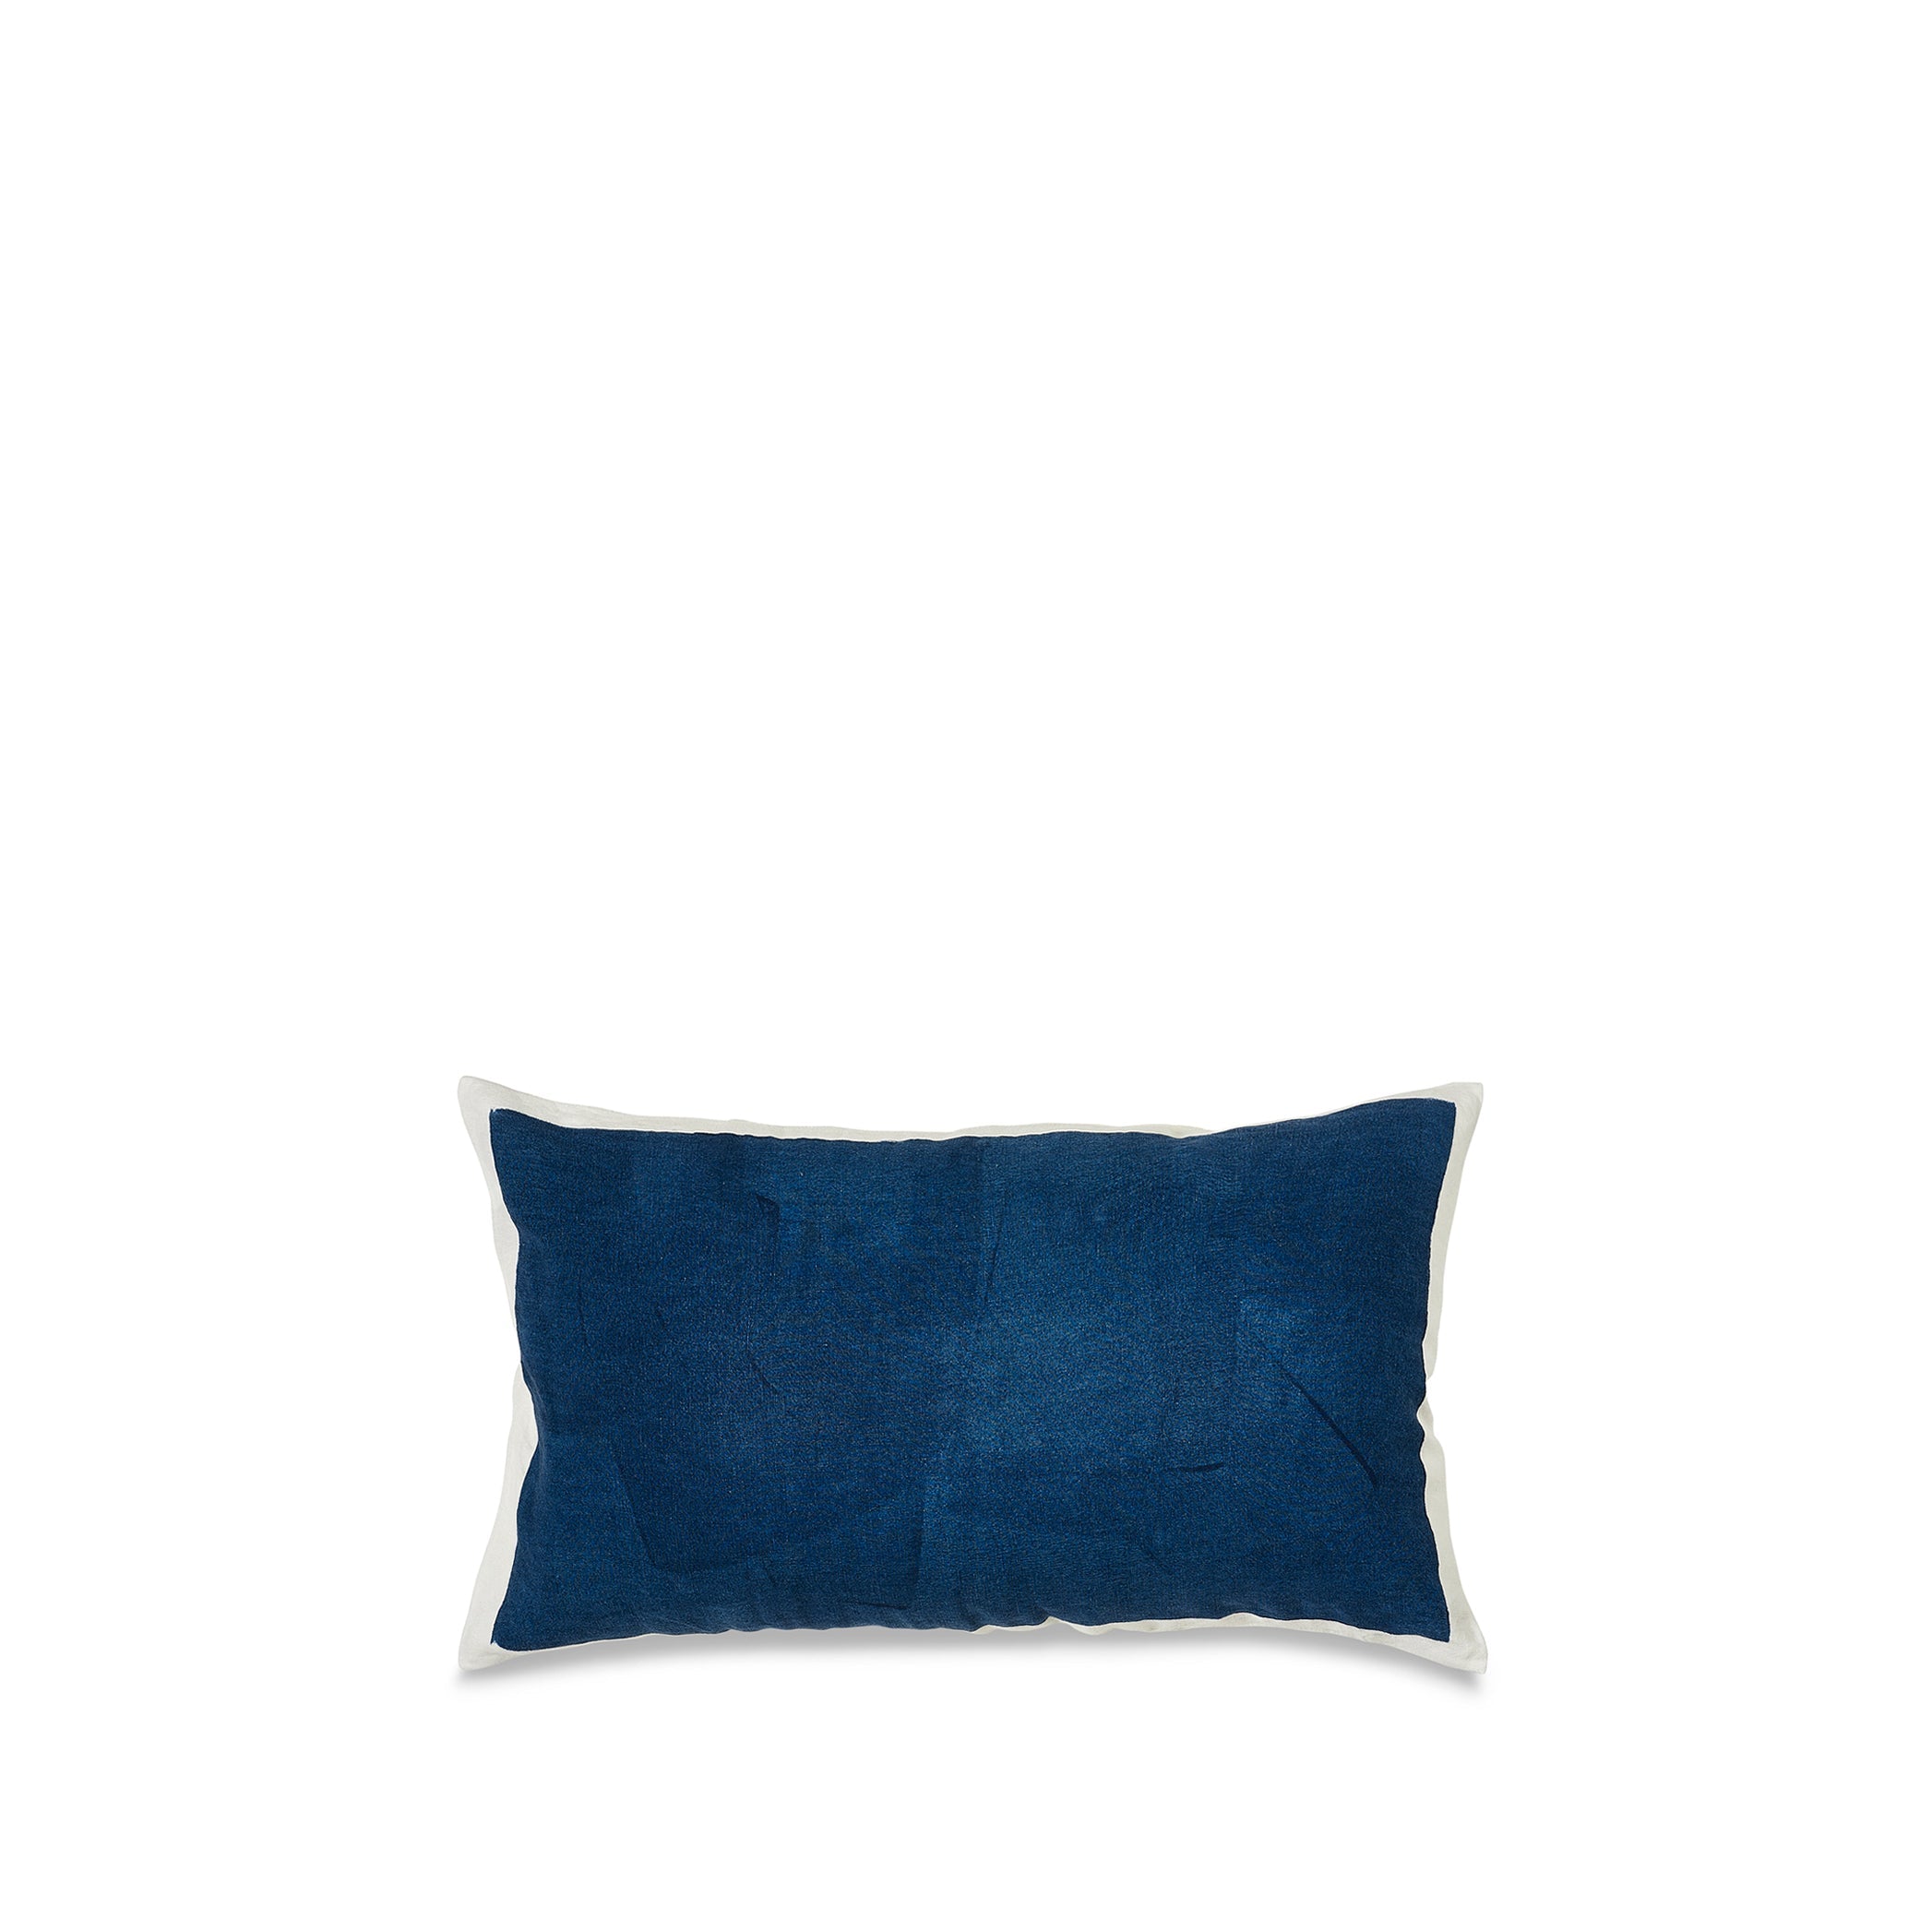 Hand Painted Linen Cushion in Midnight Blue, 50cm x 30cm